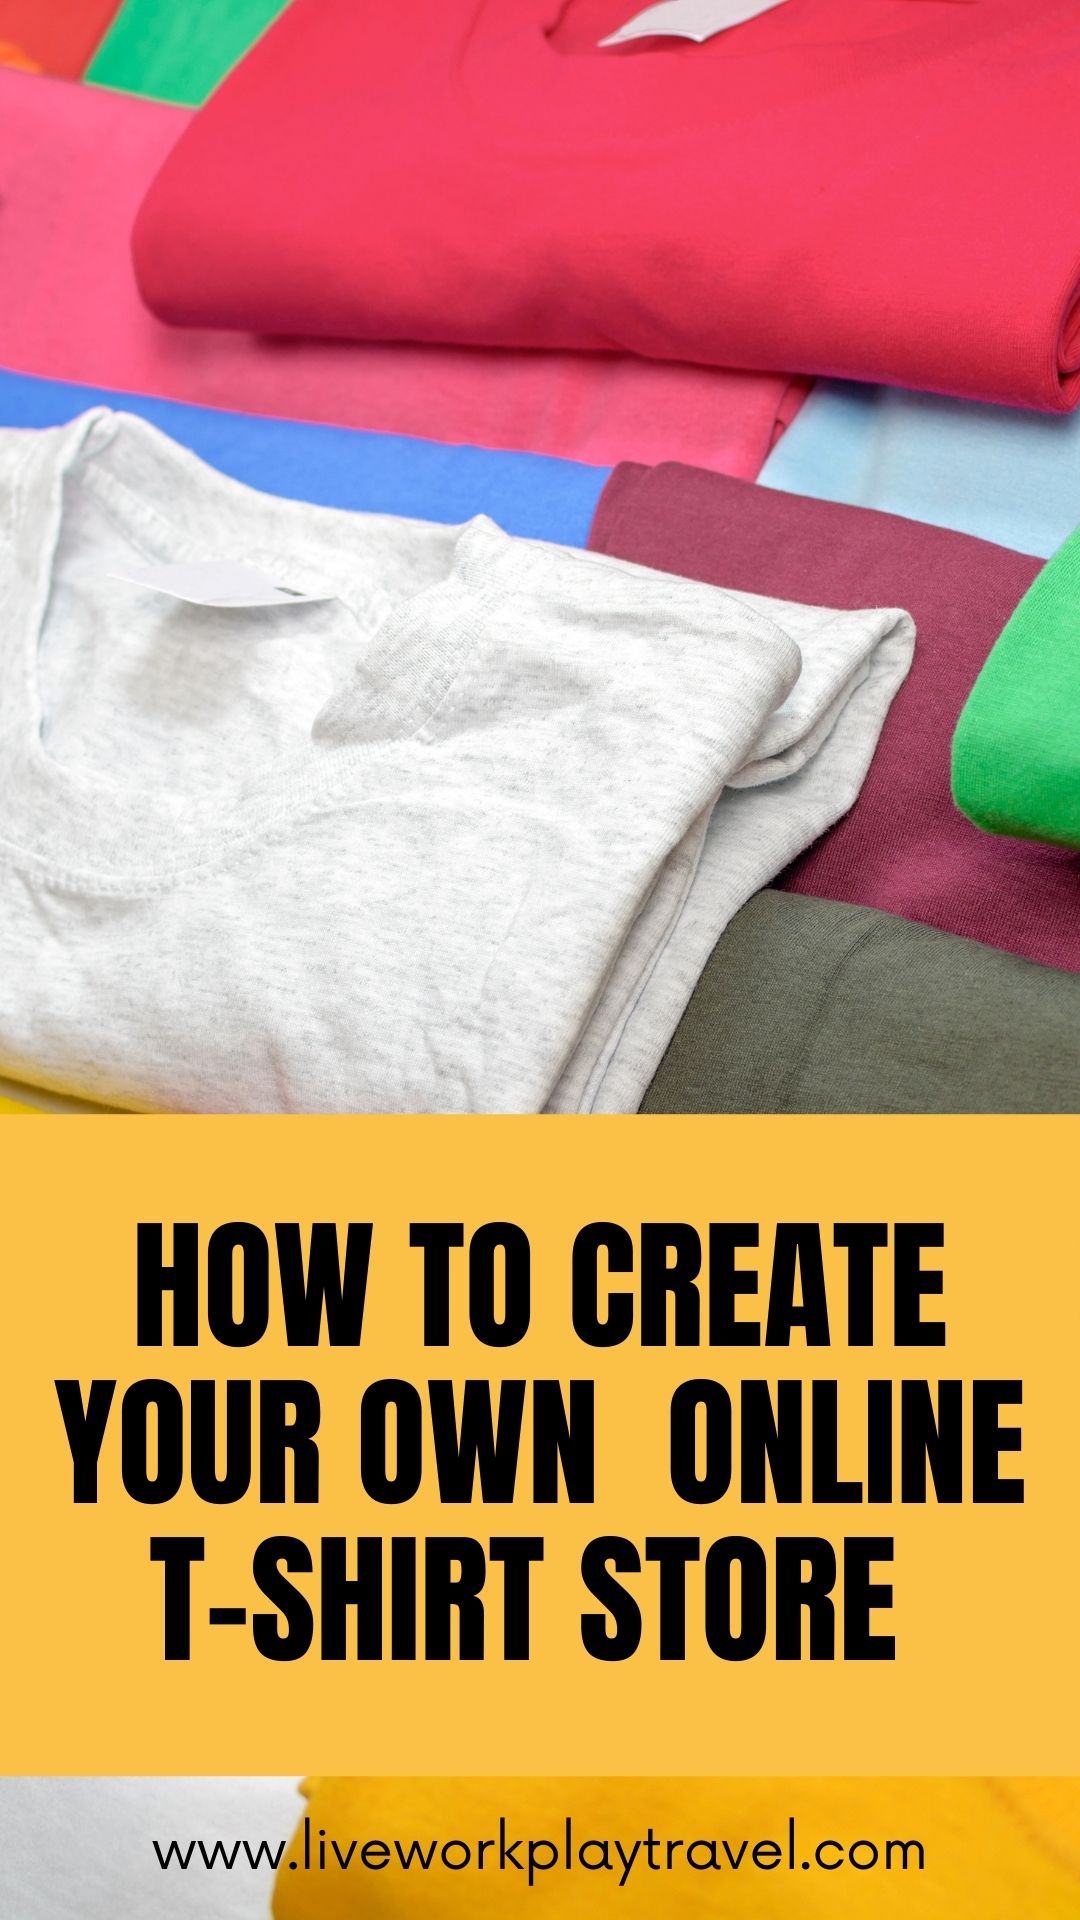 How To Sell t-shirts Online Through Your Own Store. These t-shirts Are Waiting To Be Sold Online.